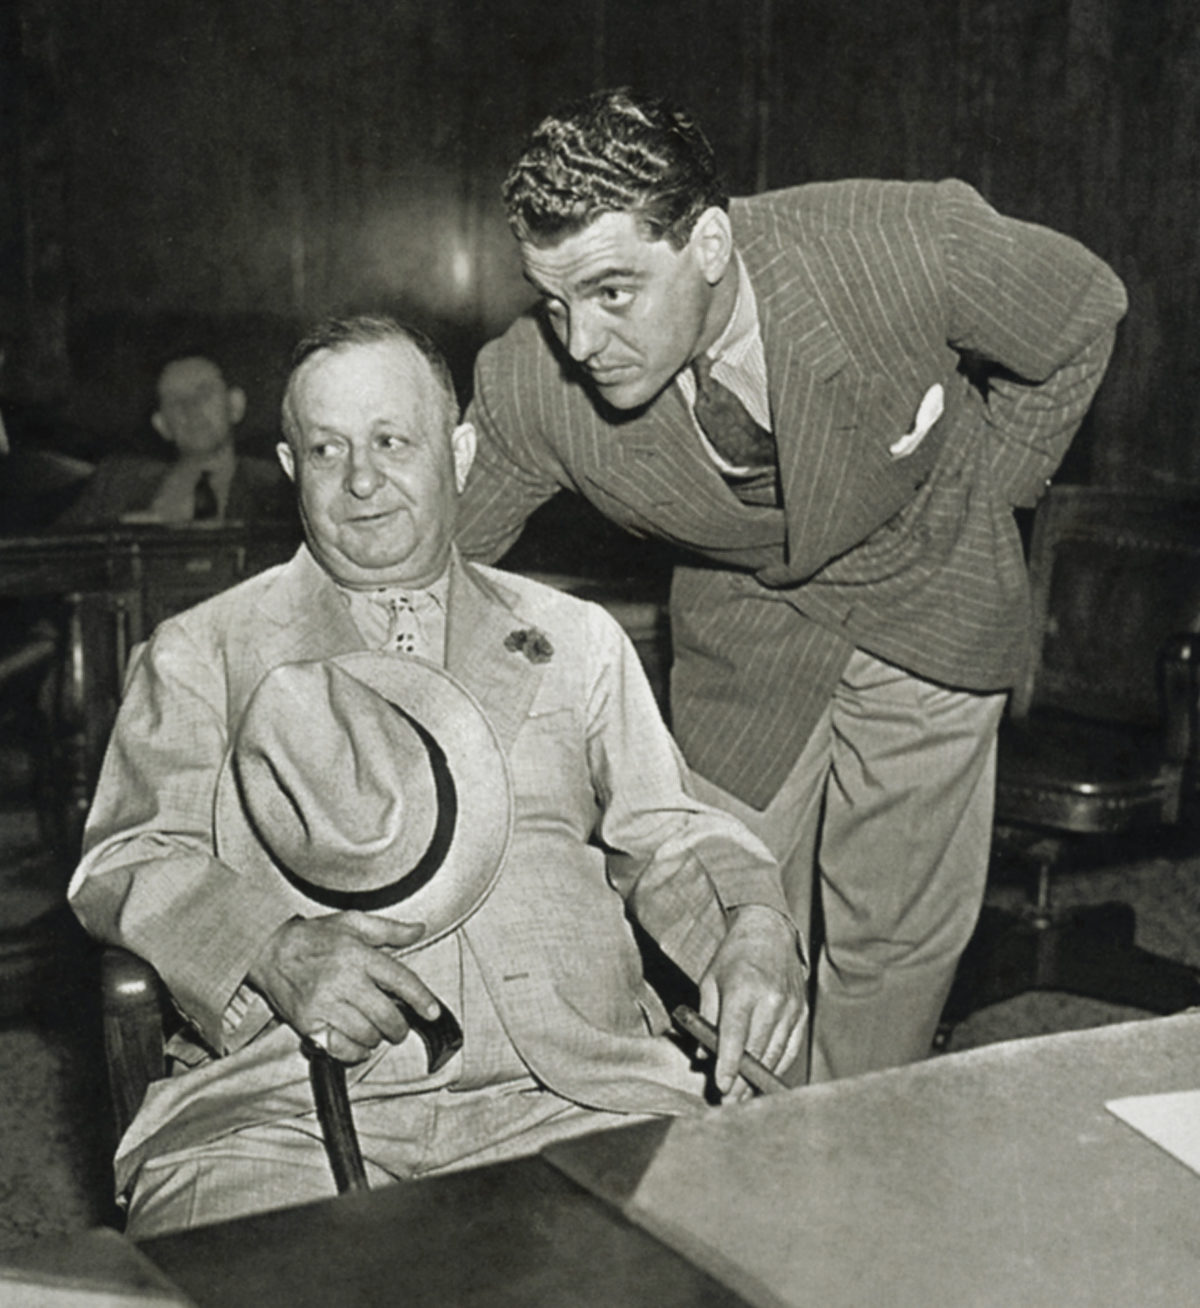 Bernstein, seated, in a New York court in 1938 with lawyer Greg Bautzer to answer charges of kiting checks.